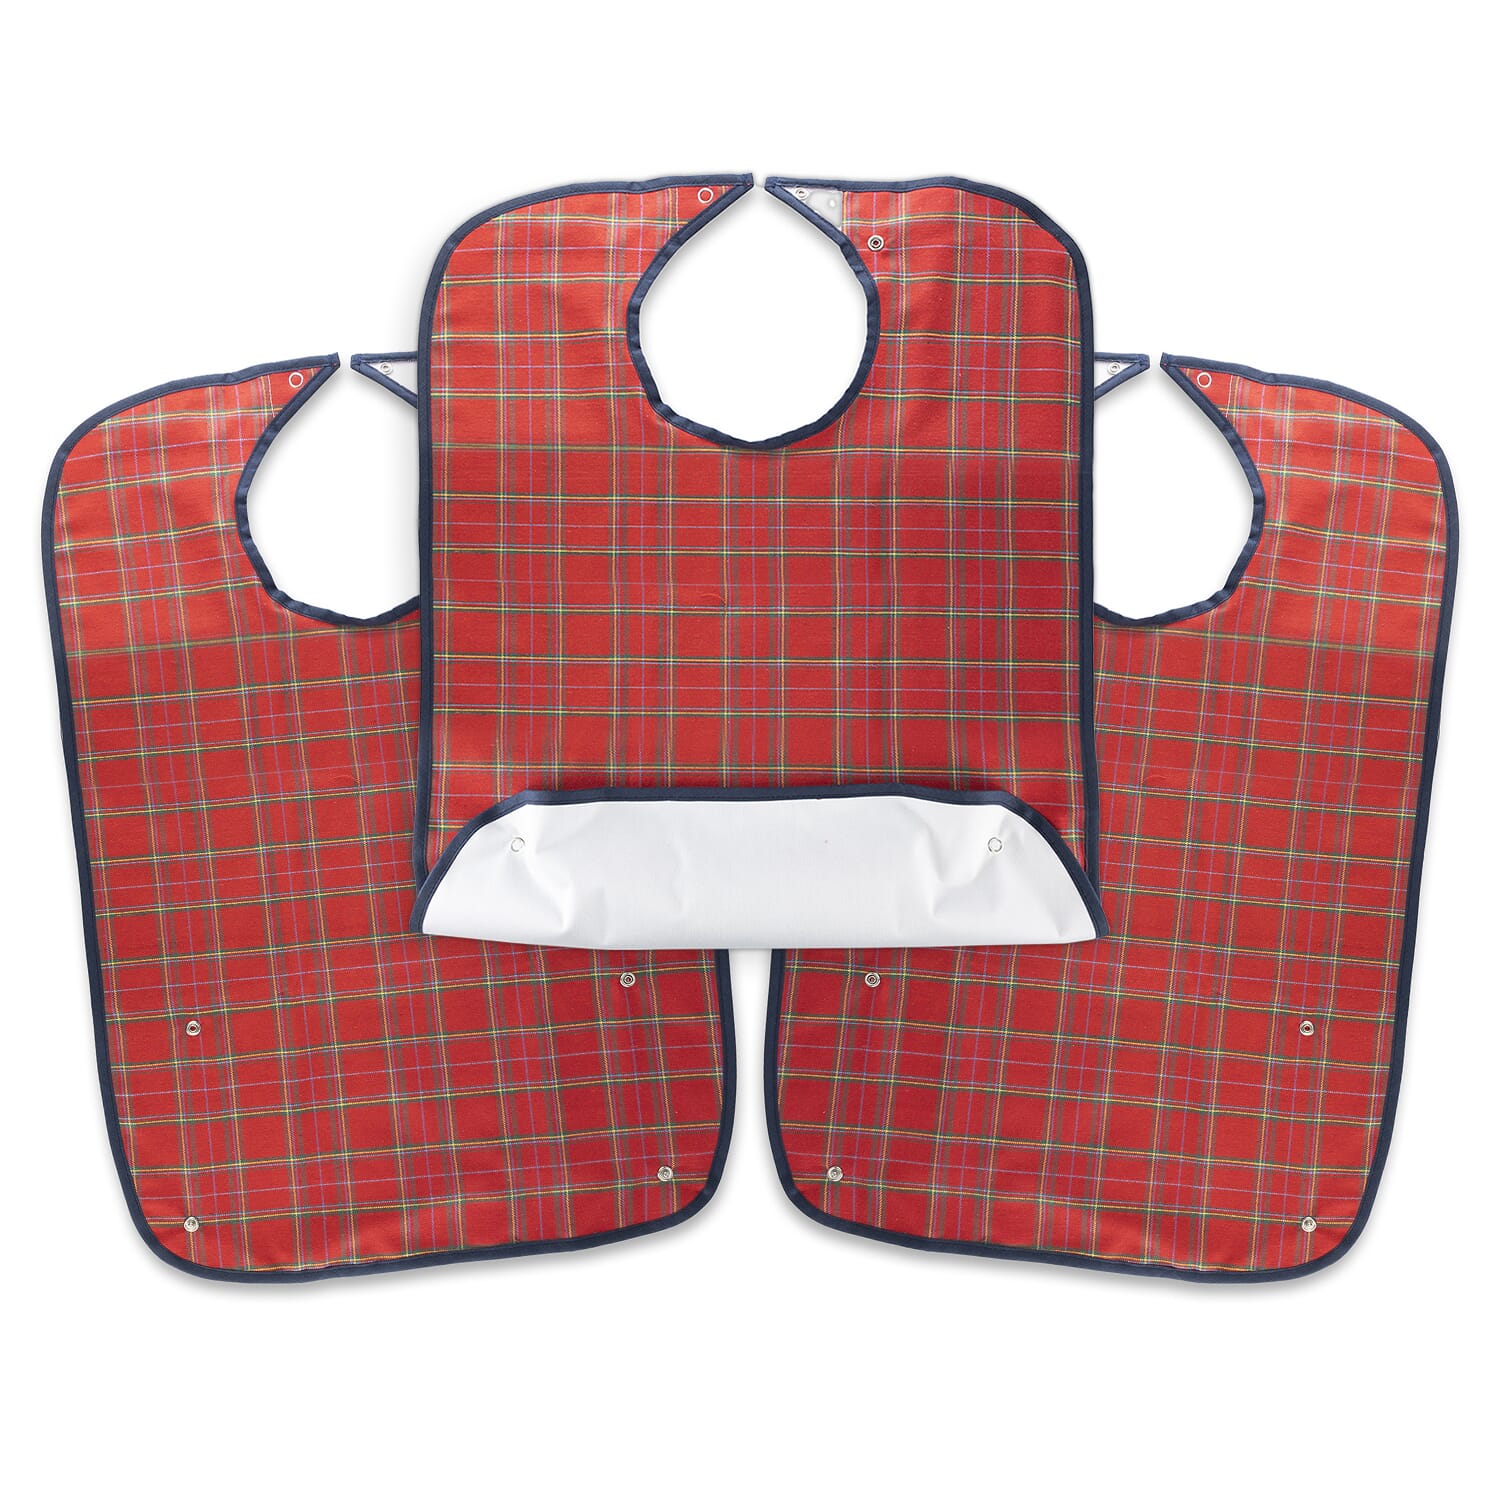 View Everyday Bib Small Red Pack of 3 information